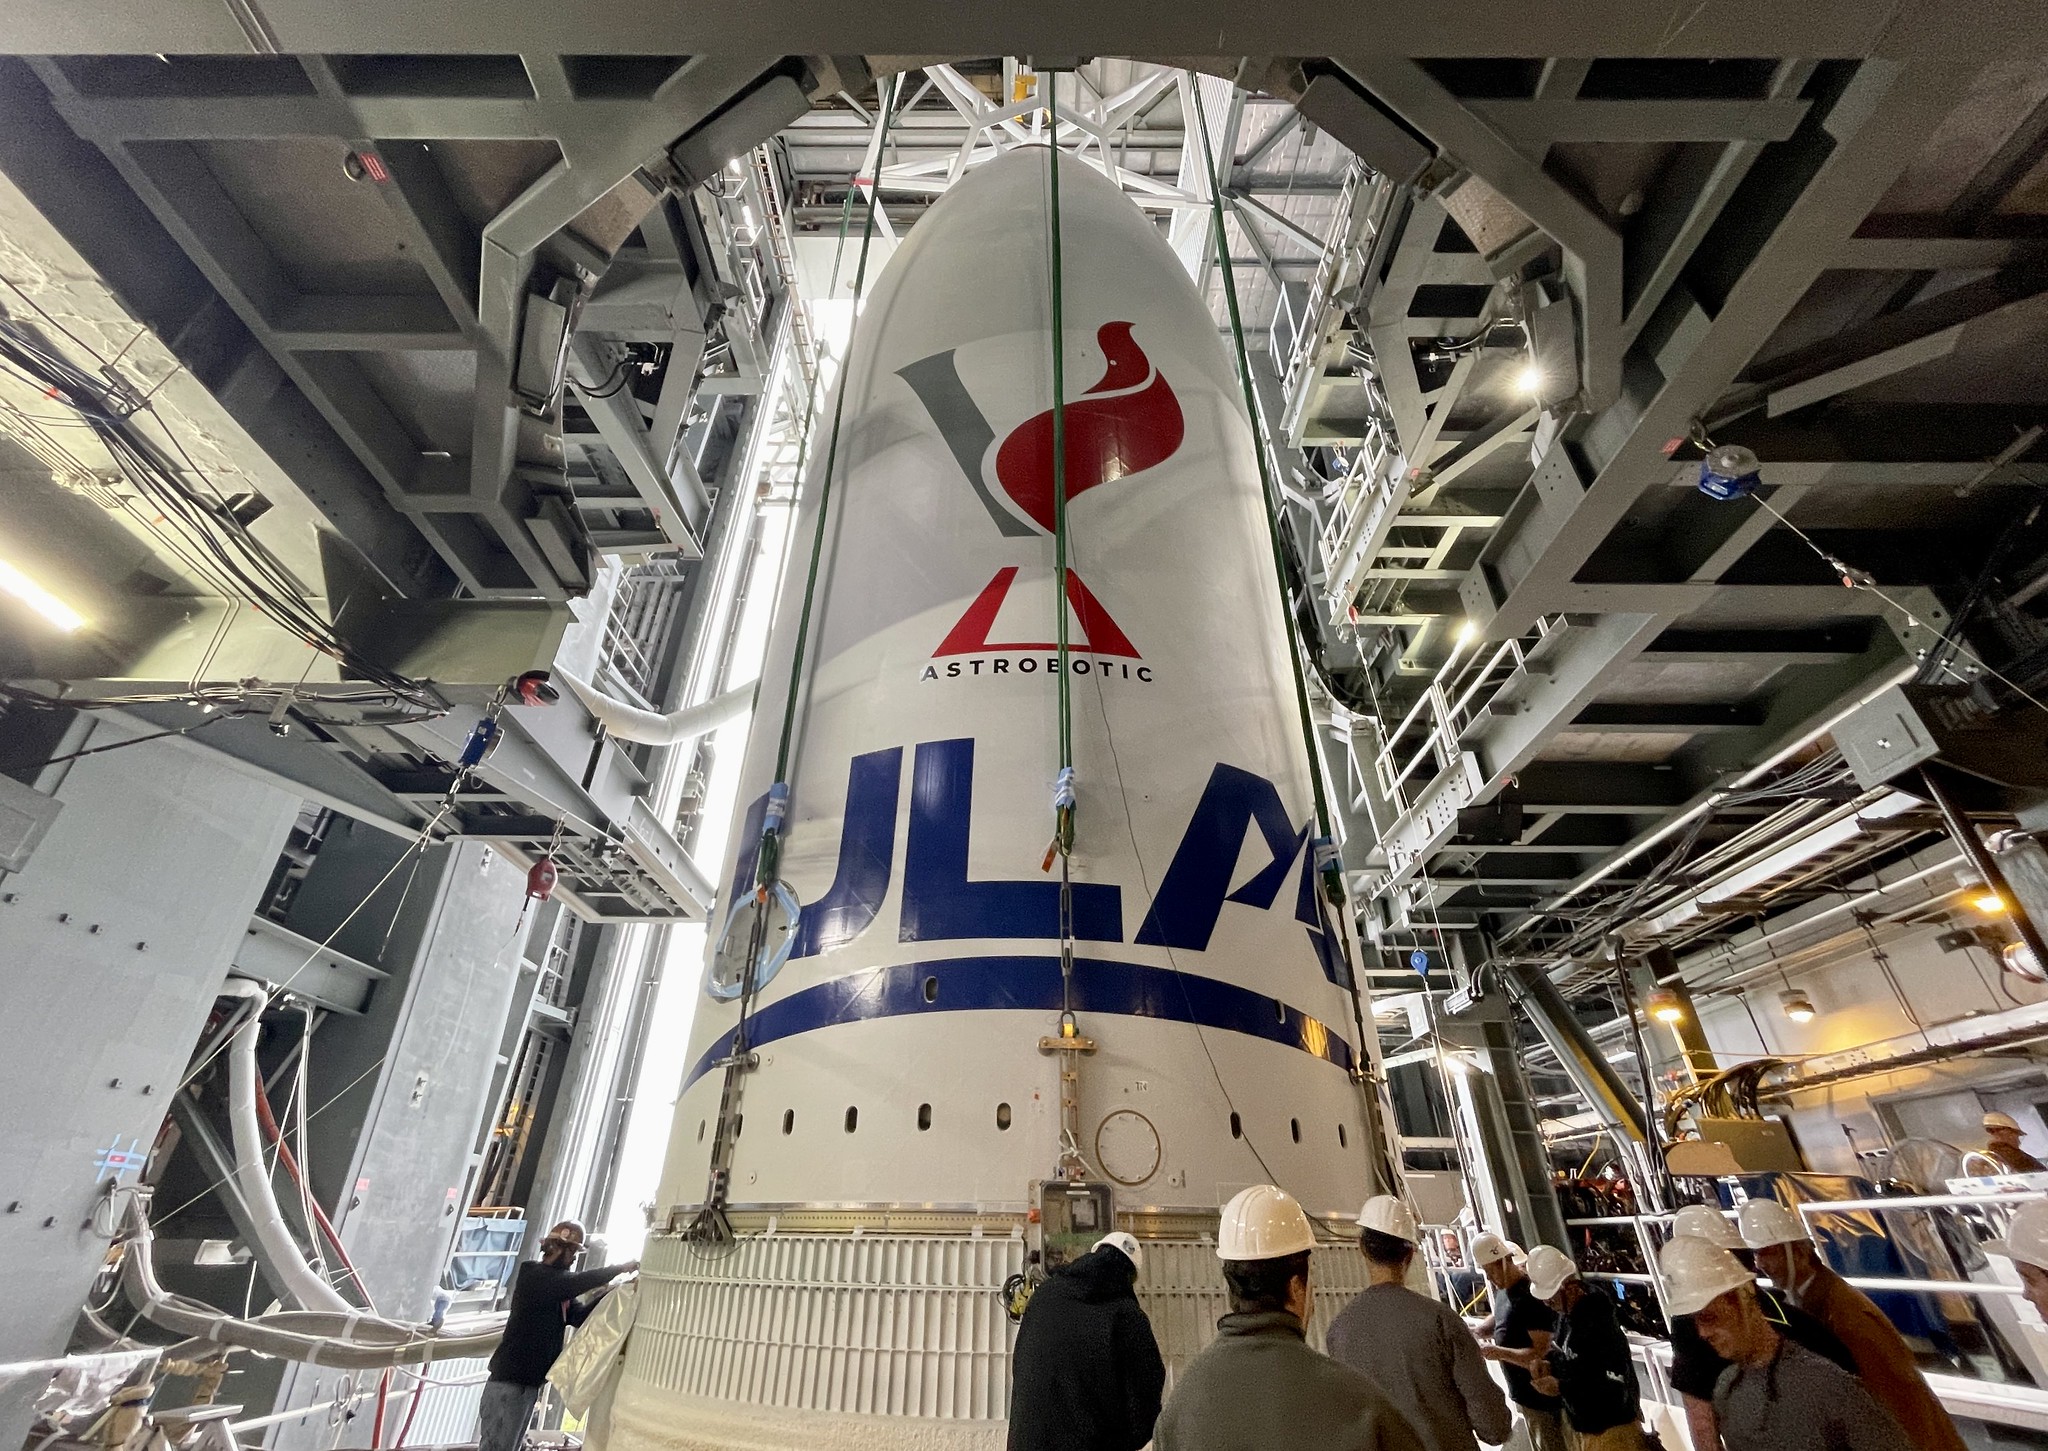 United Launch Alliance and Astrobotic launches, Countdown Capital shutdown